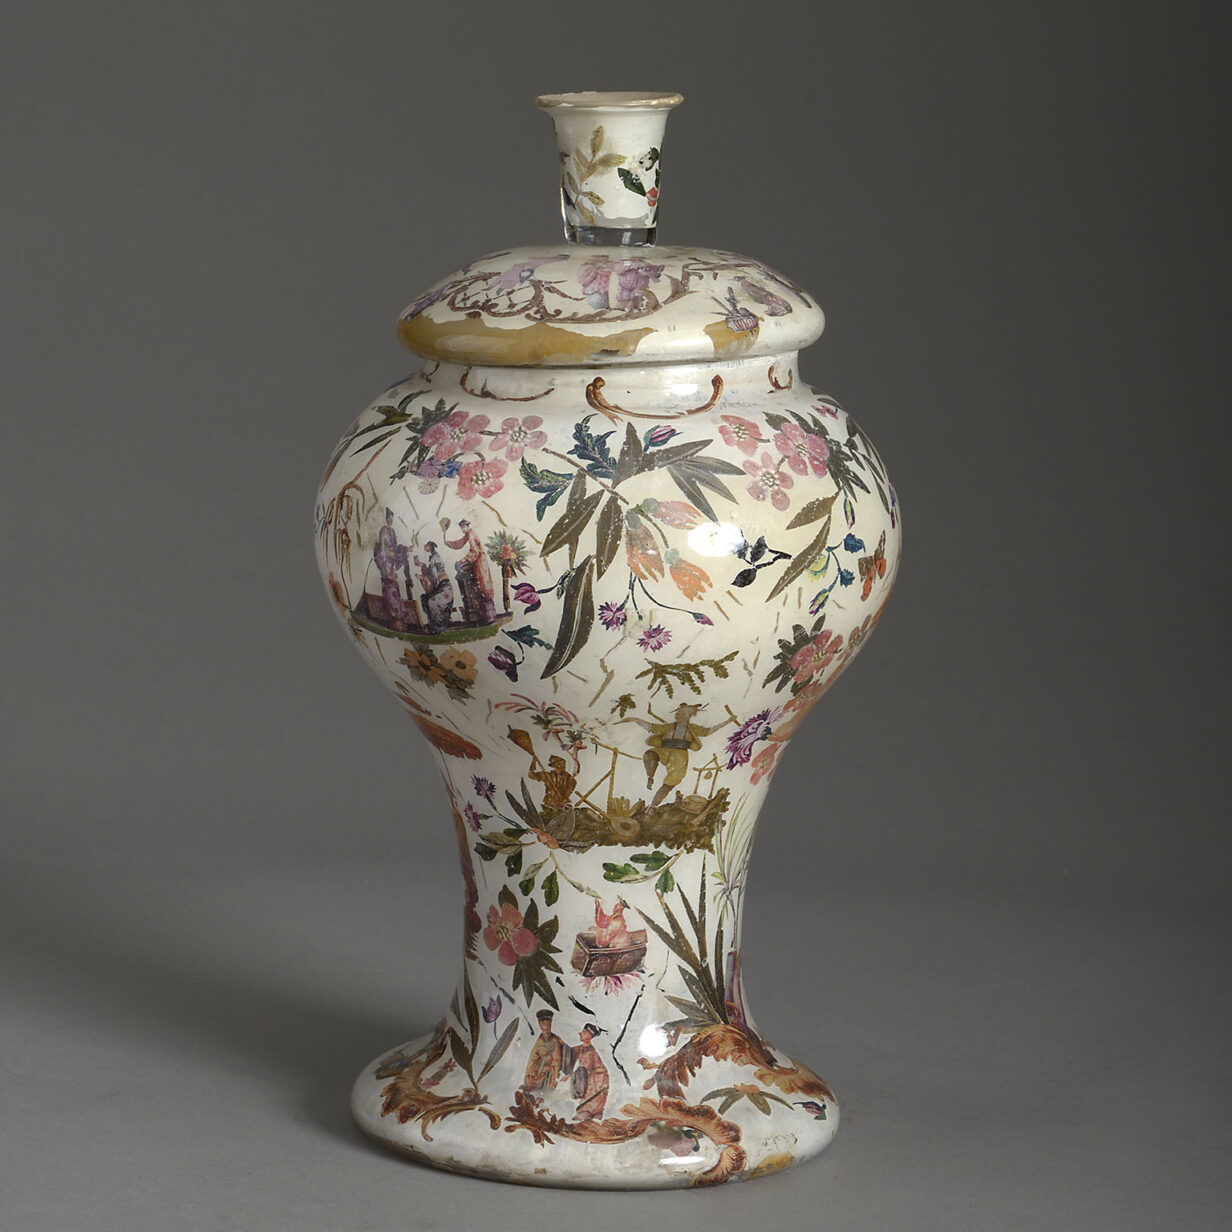 19th century decalcomania vase and cover